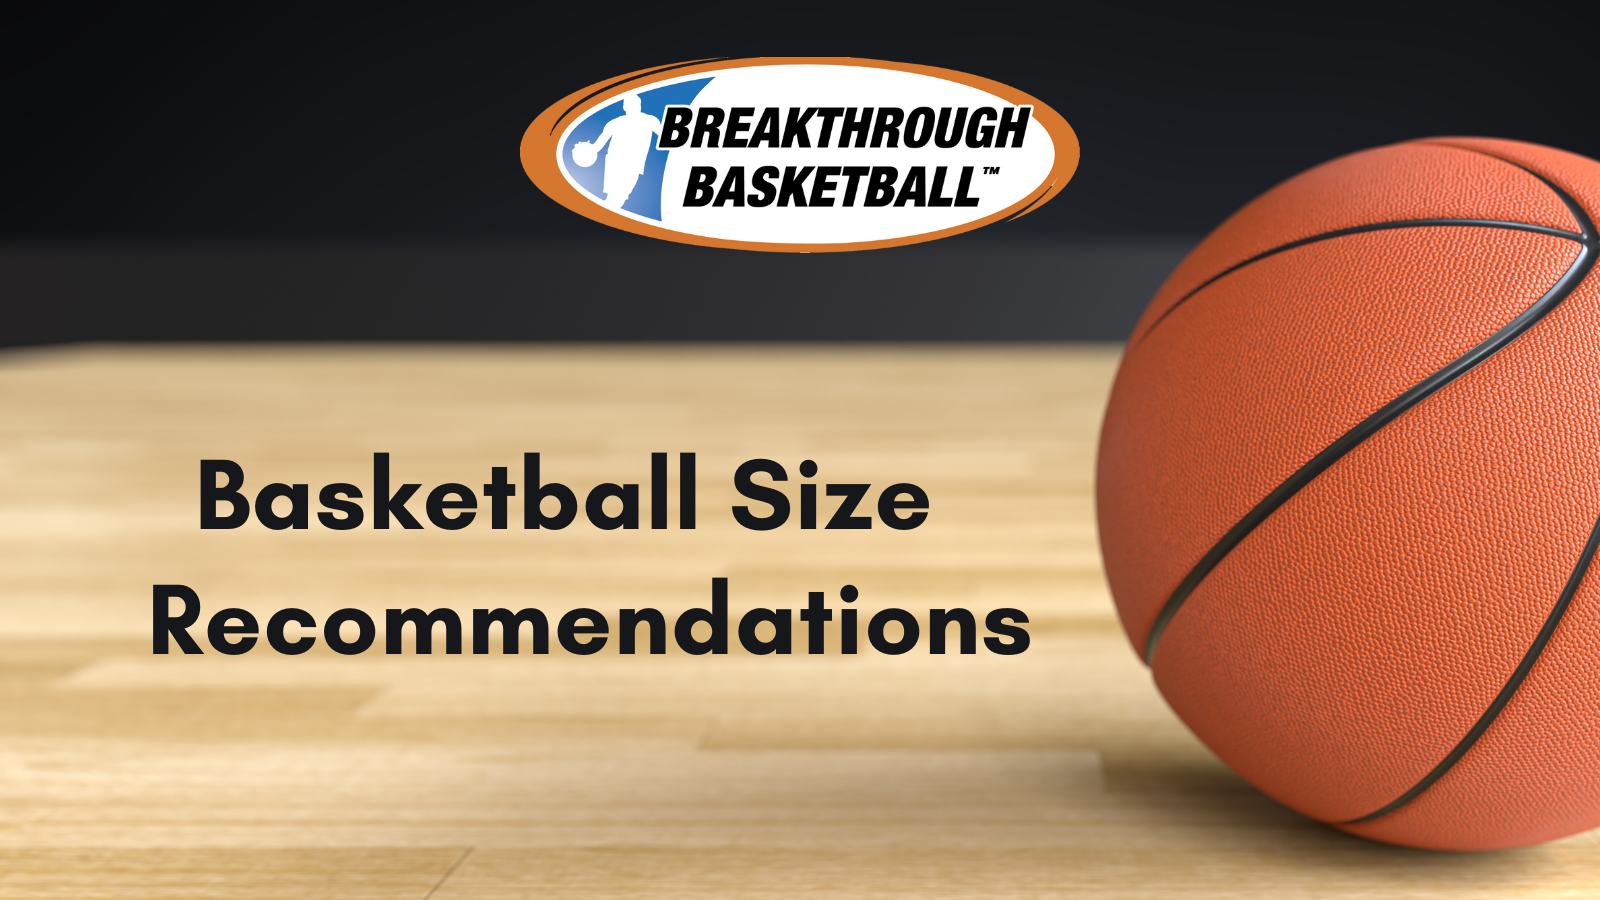 Basketball Size Chart - Recommended Sizes for Kids & Adults